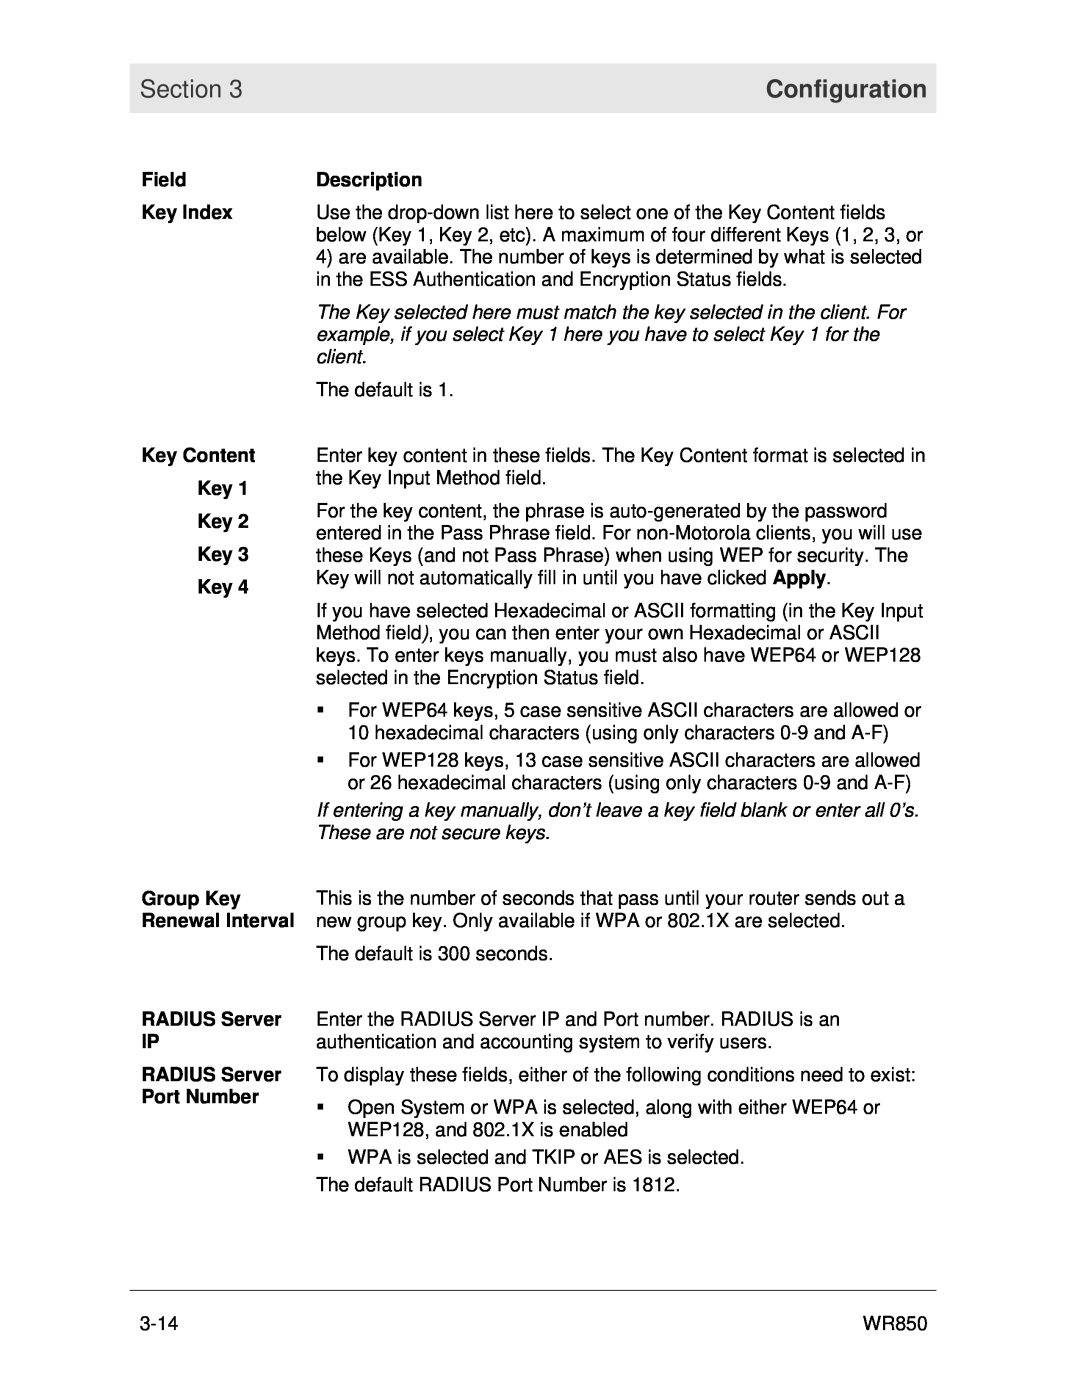 Motorola WR850 manual Section, Configuration, The default is 